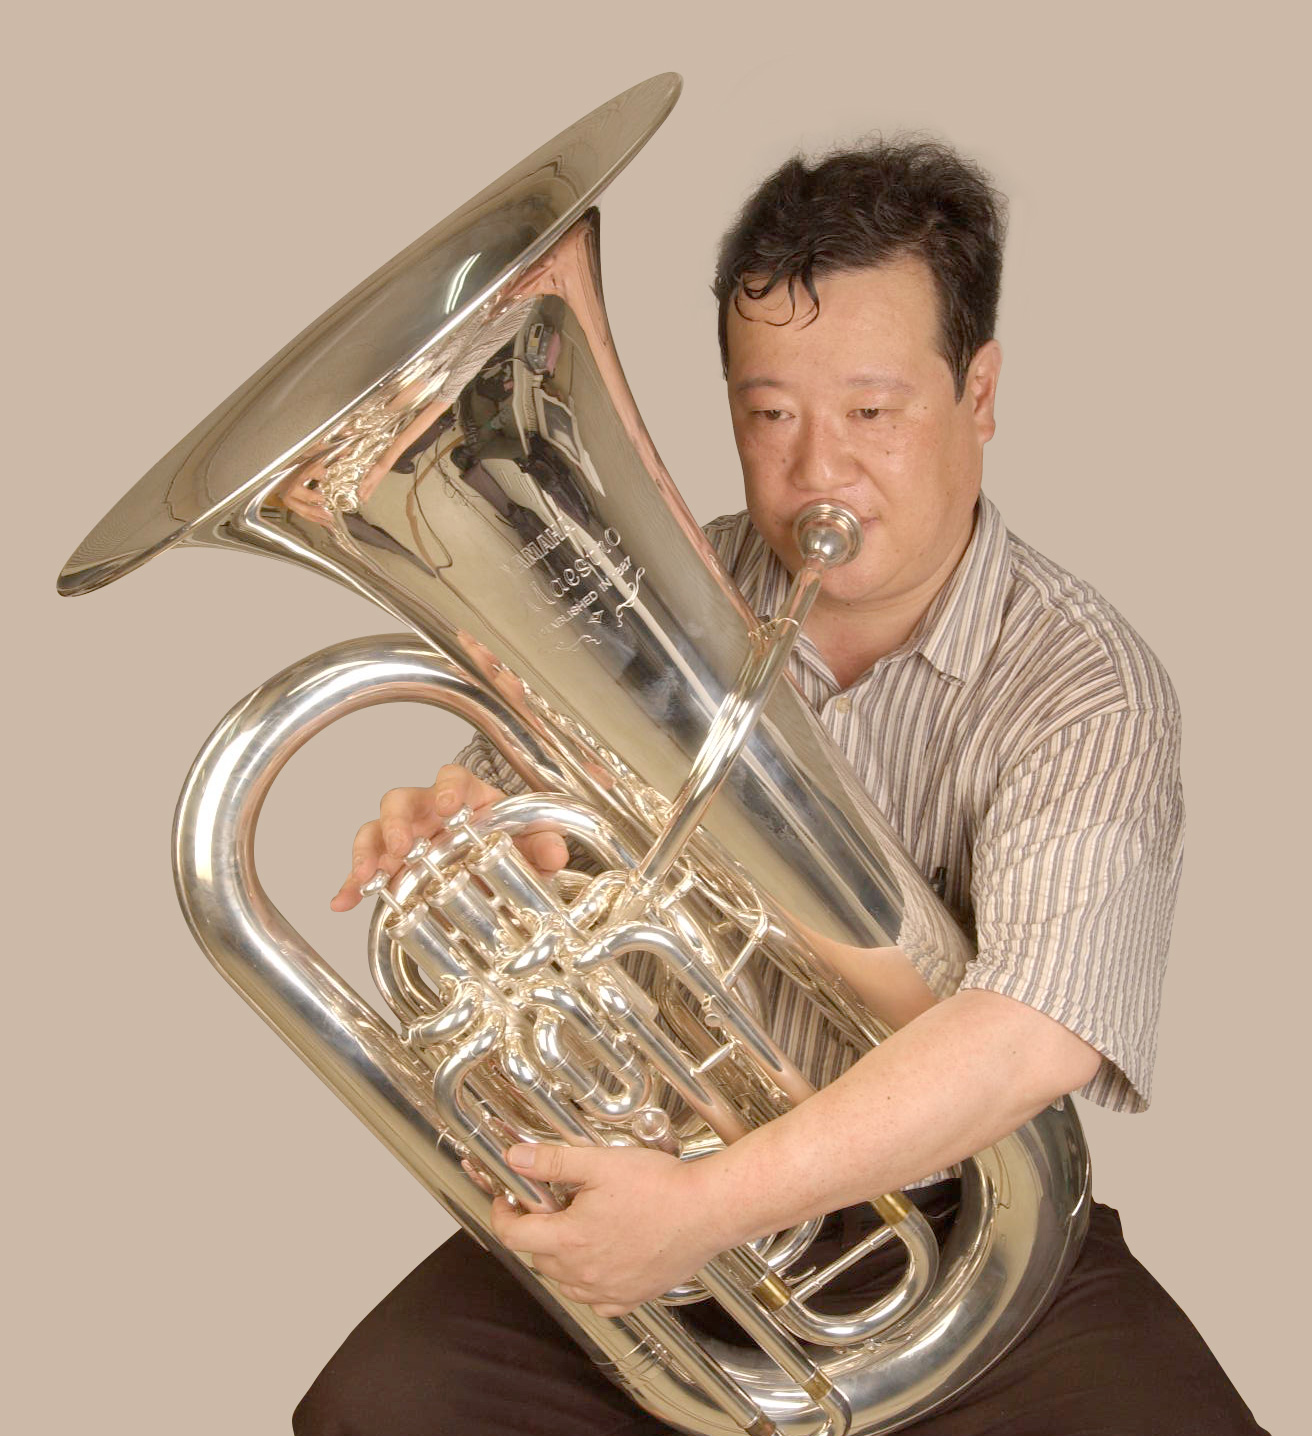 Top-action tubas have the bell on the player's right side